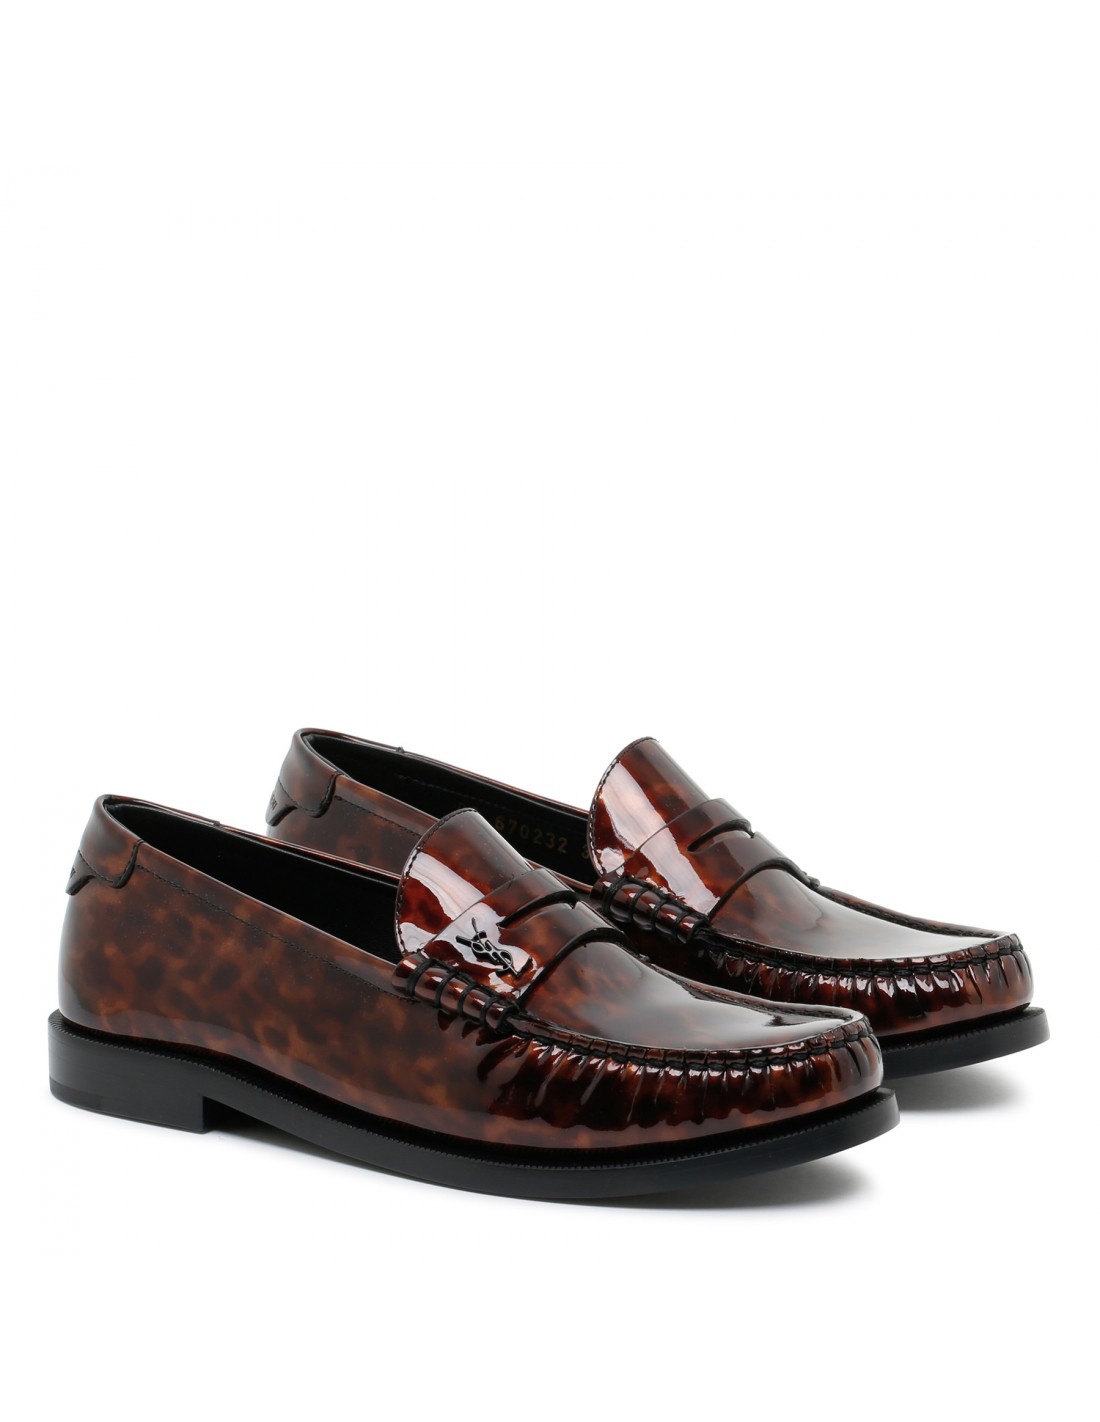 Le Loafer monogram penny slippers